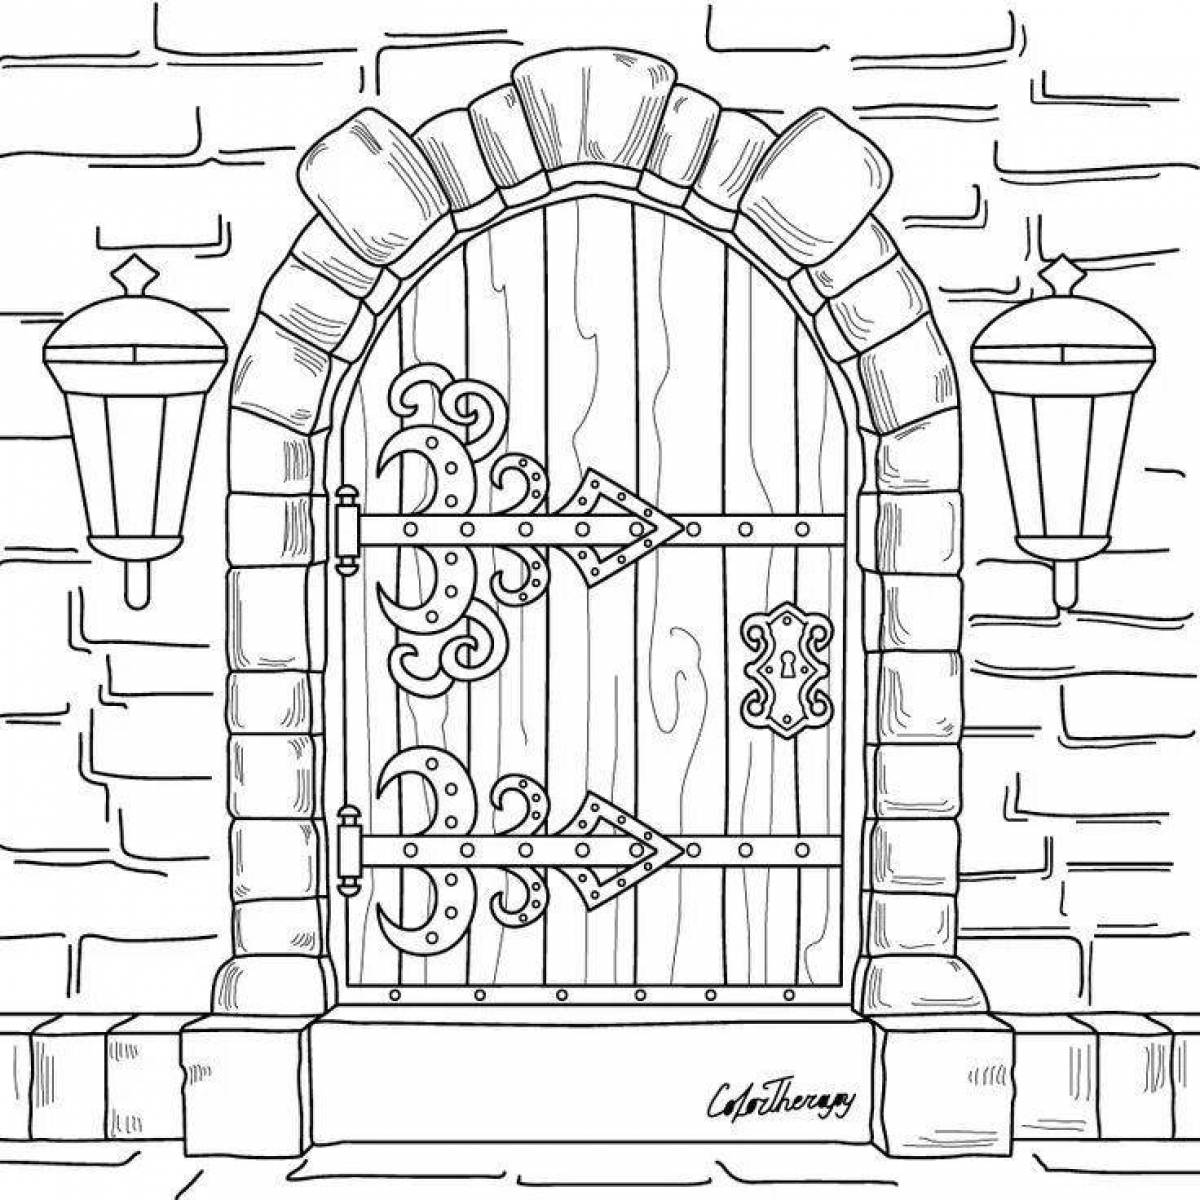 Cute figurine from doors coloring page